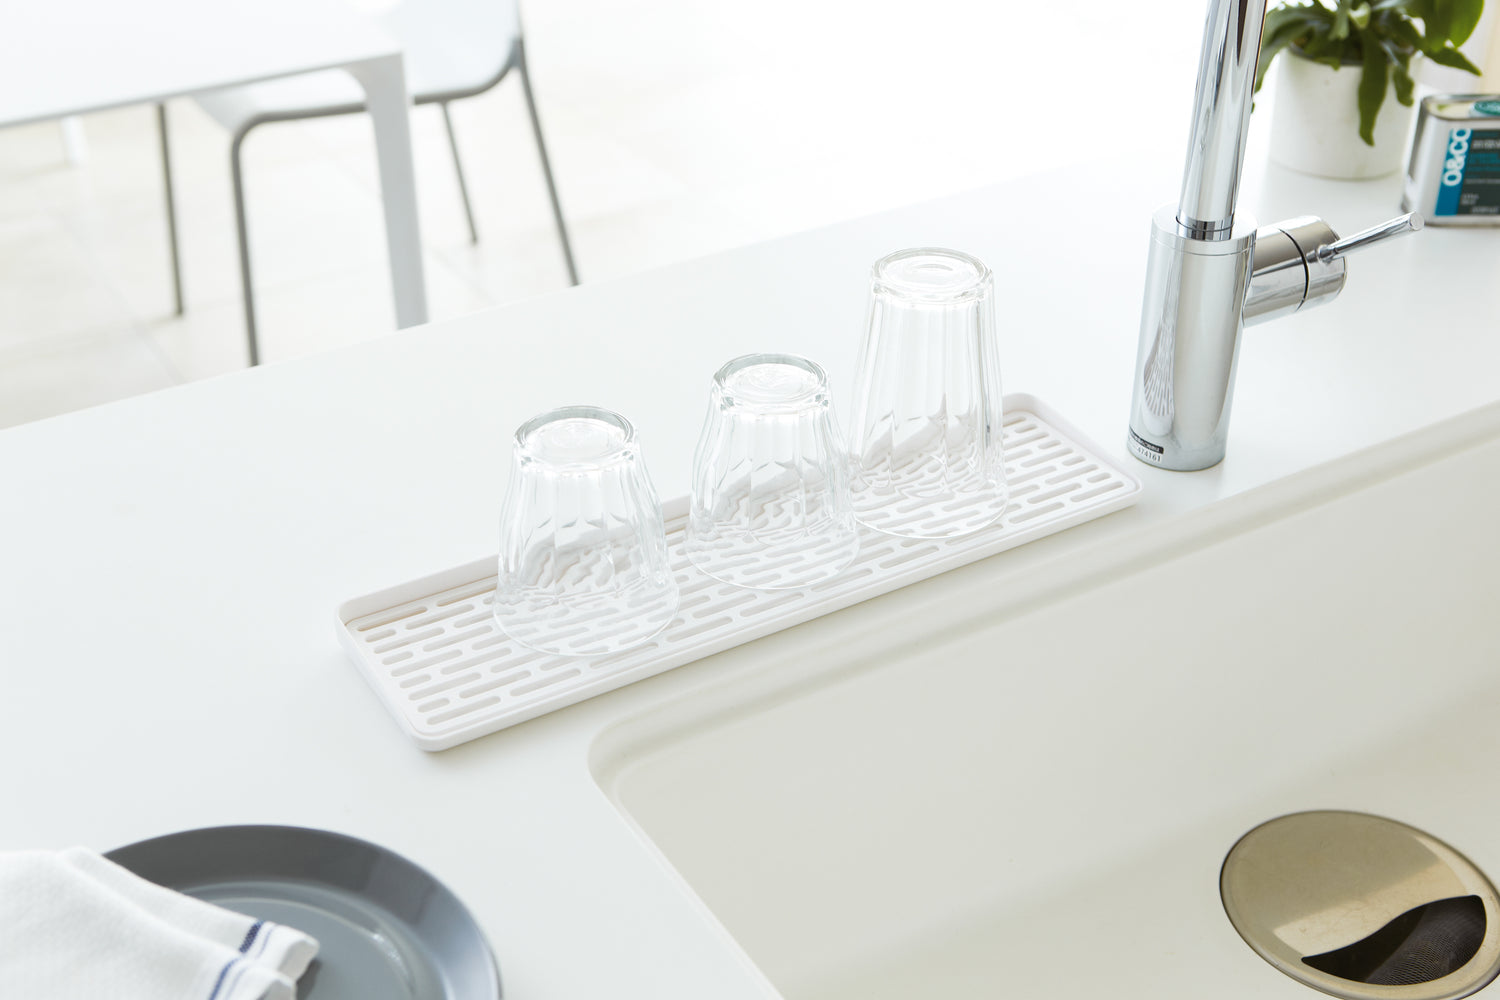 View 2 - White Sink Drainer Tray with glasses on sink counter by Yamazaki Home.